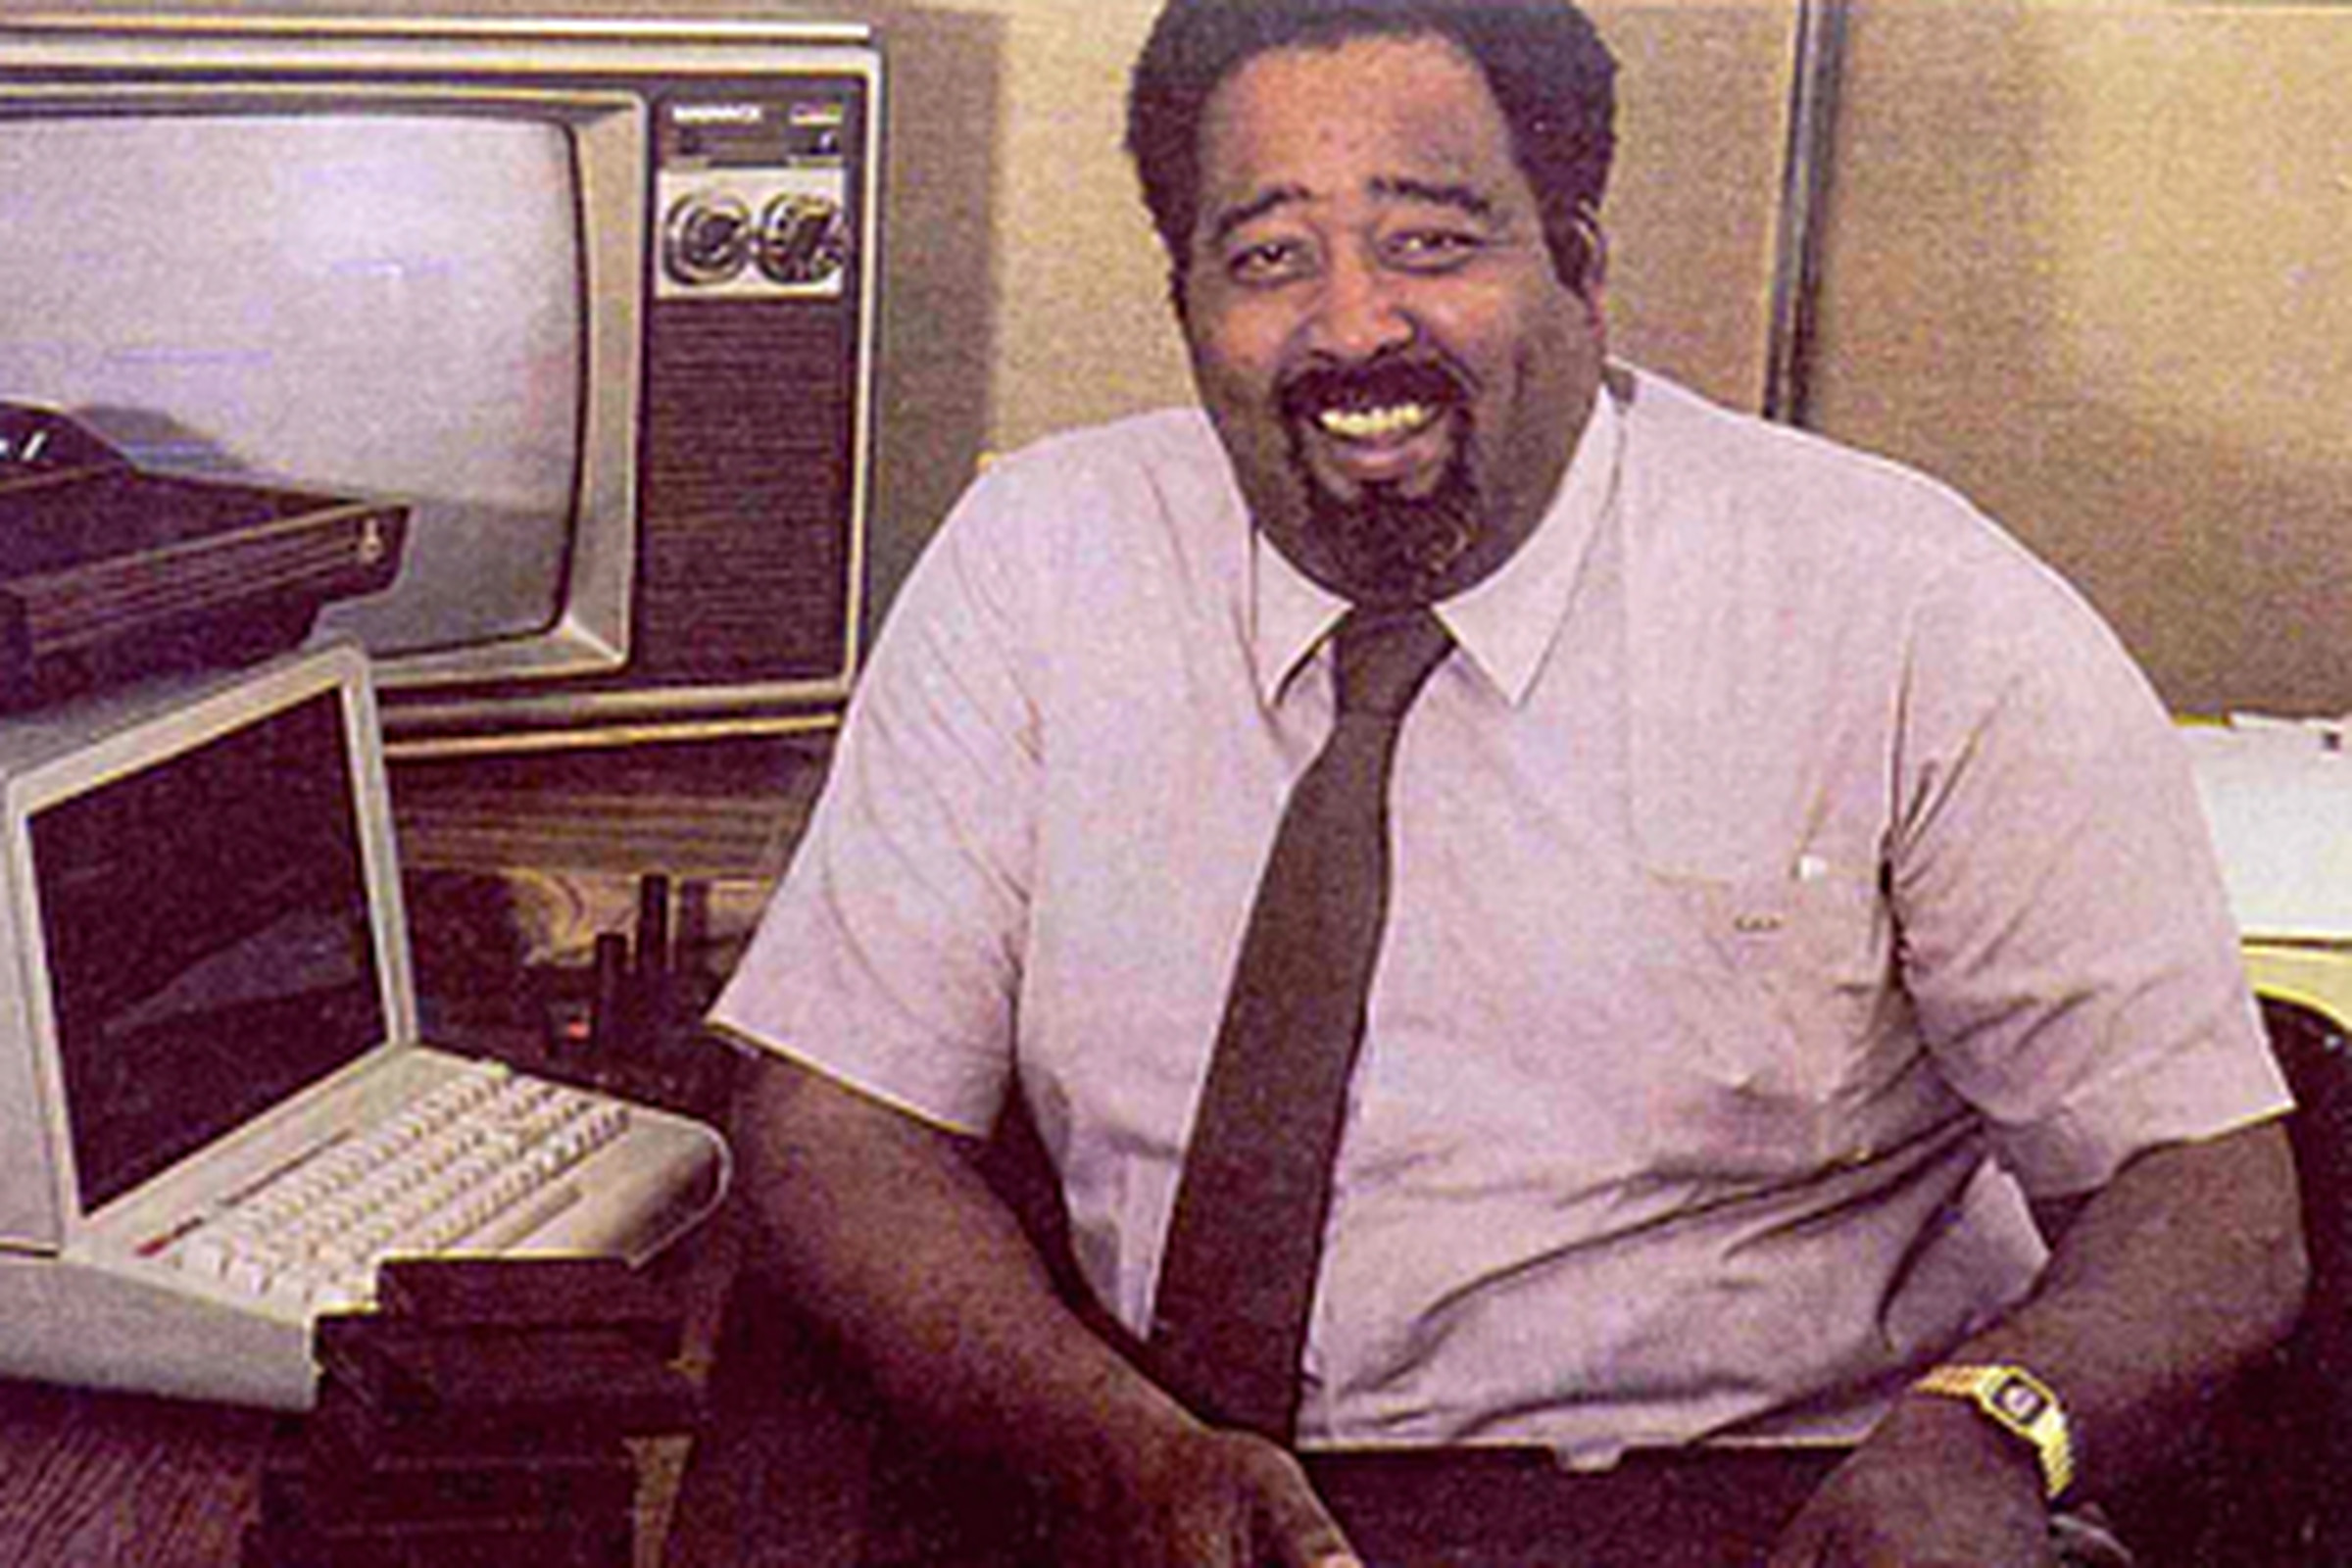 Gerald Lawson pictured with the Fairchild Channel F home console